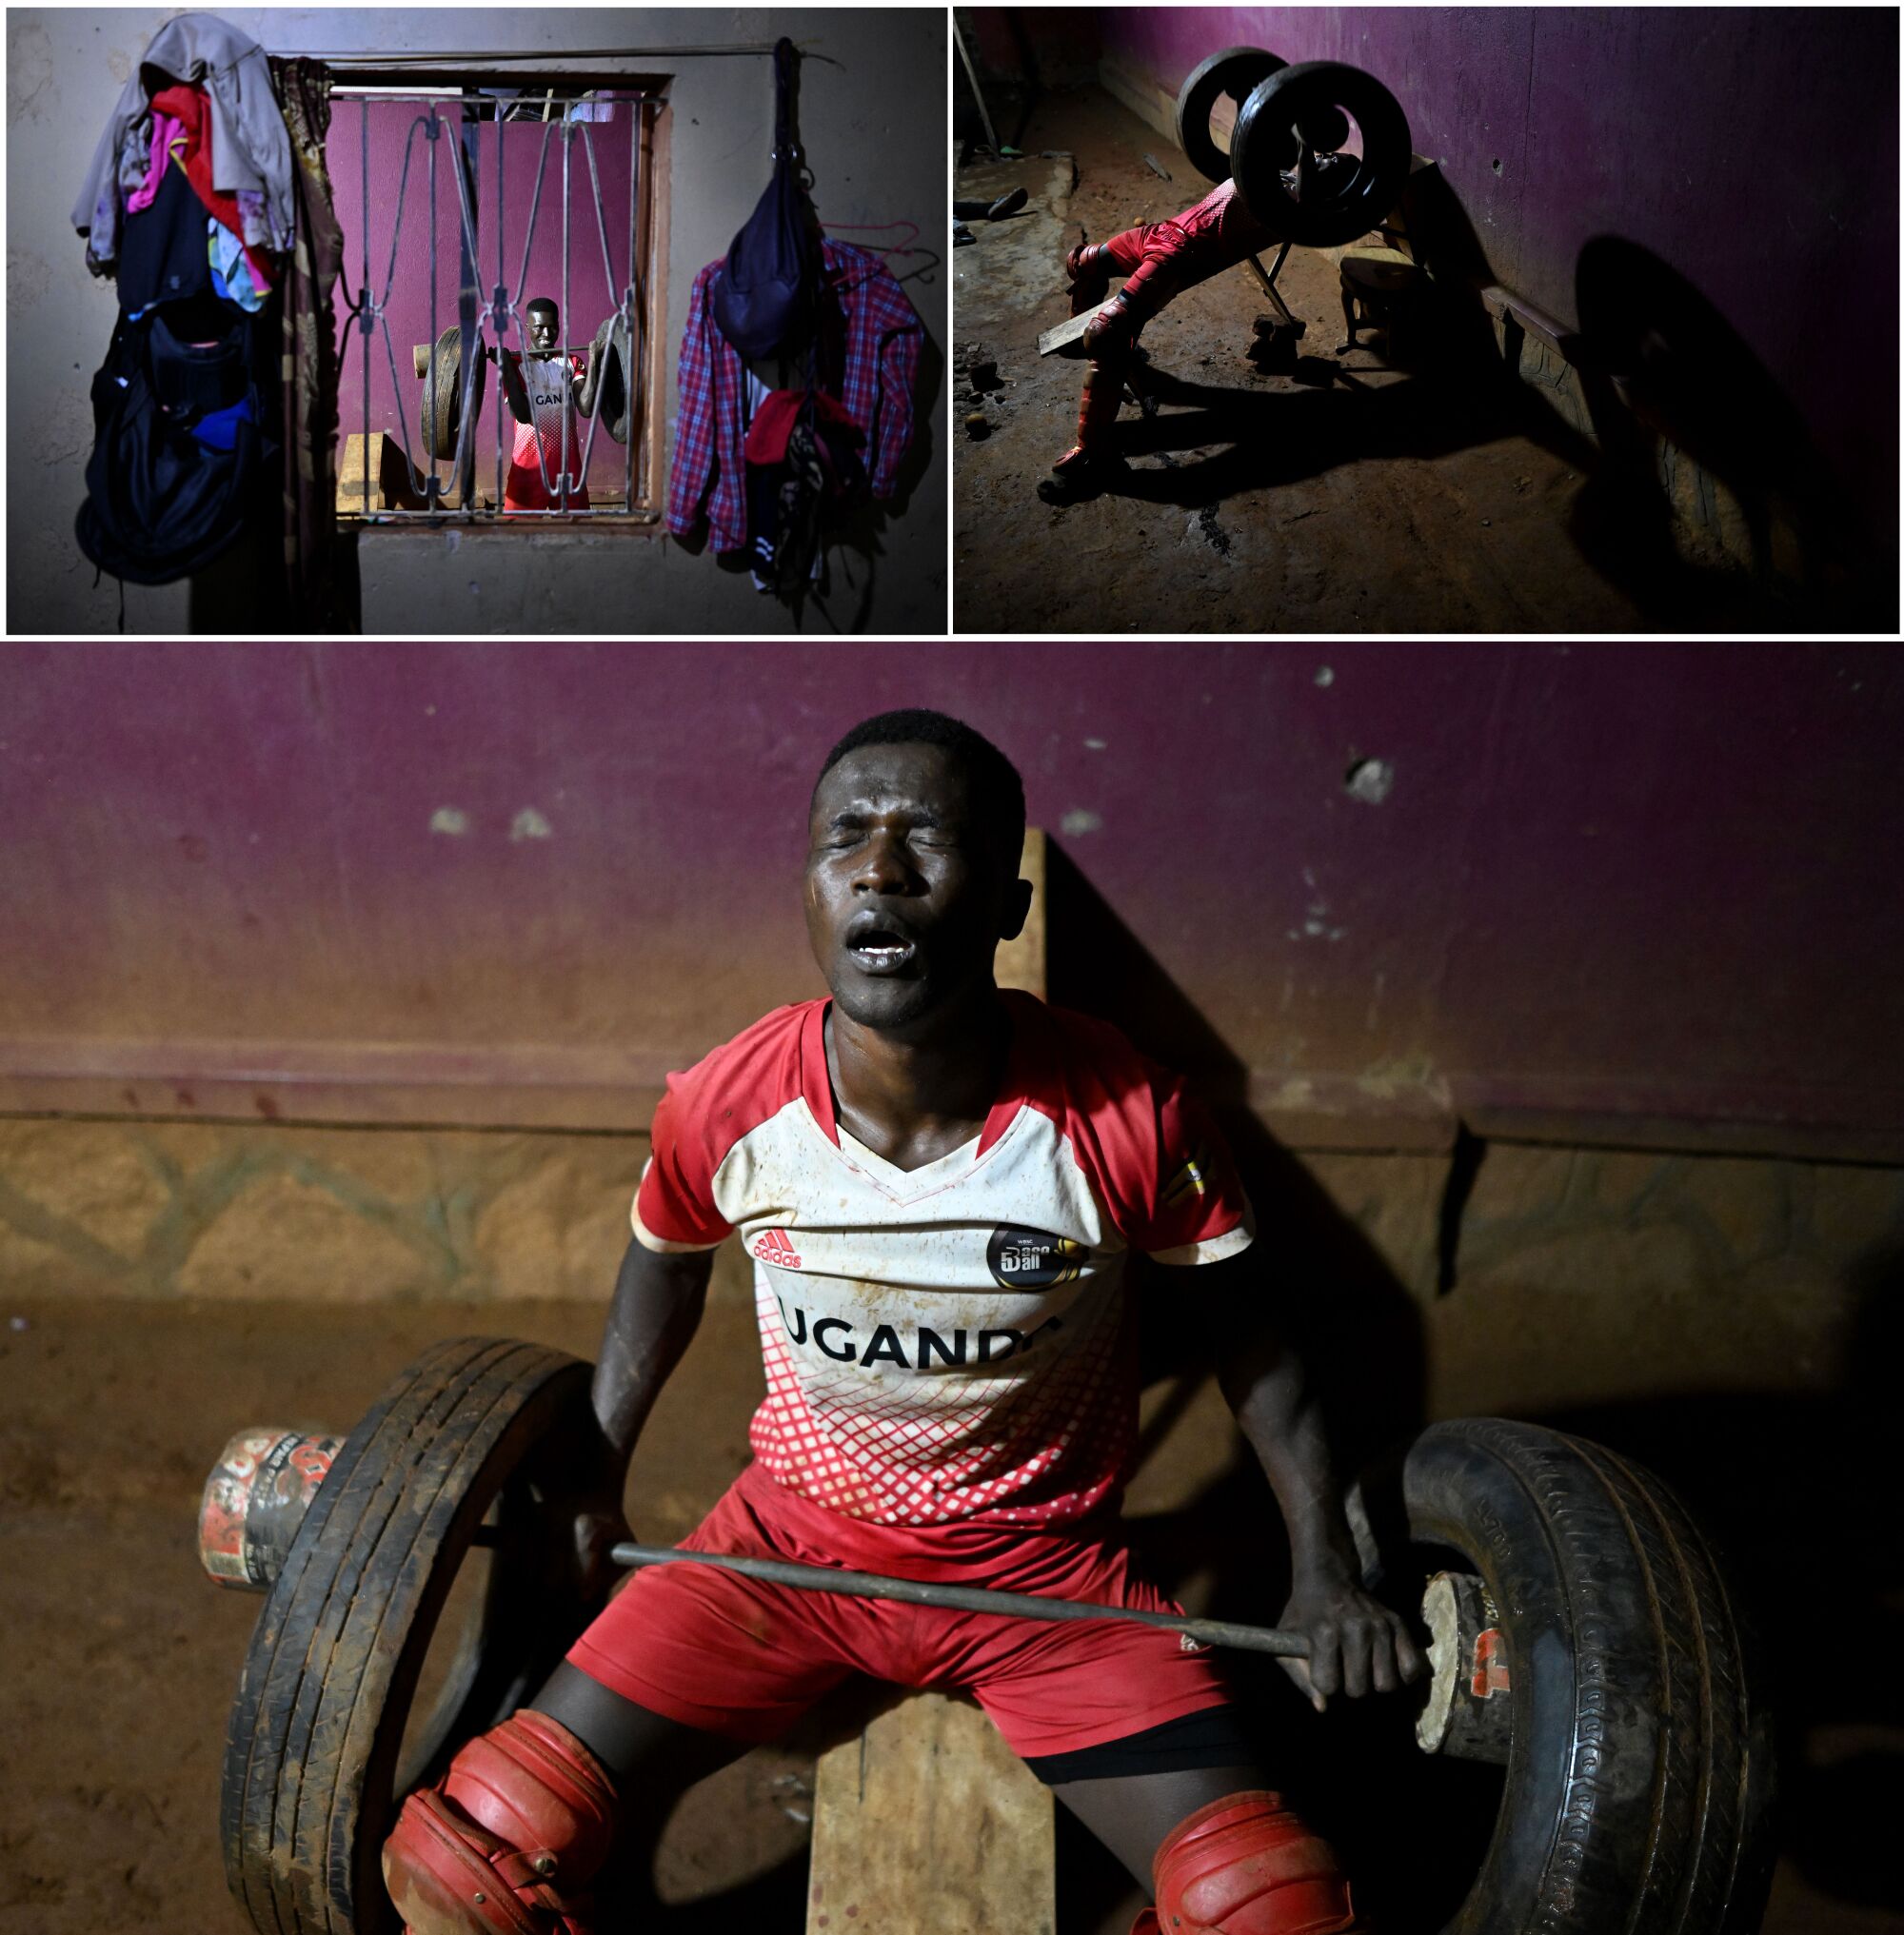 Dennis Kasumba works out late at night with old tires outside his home